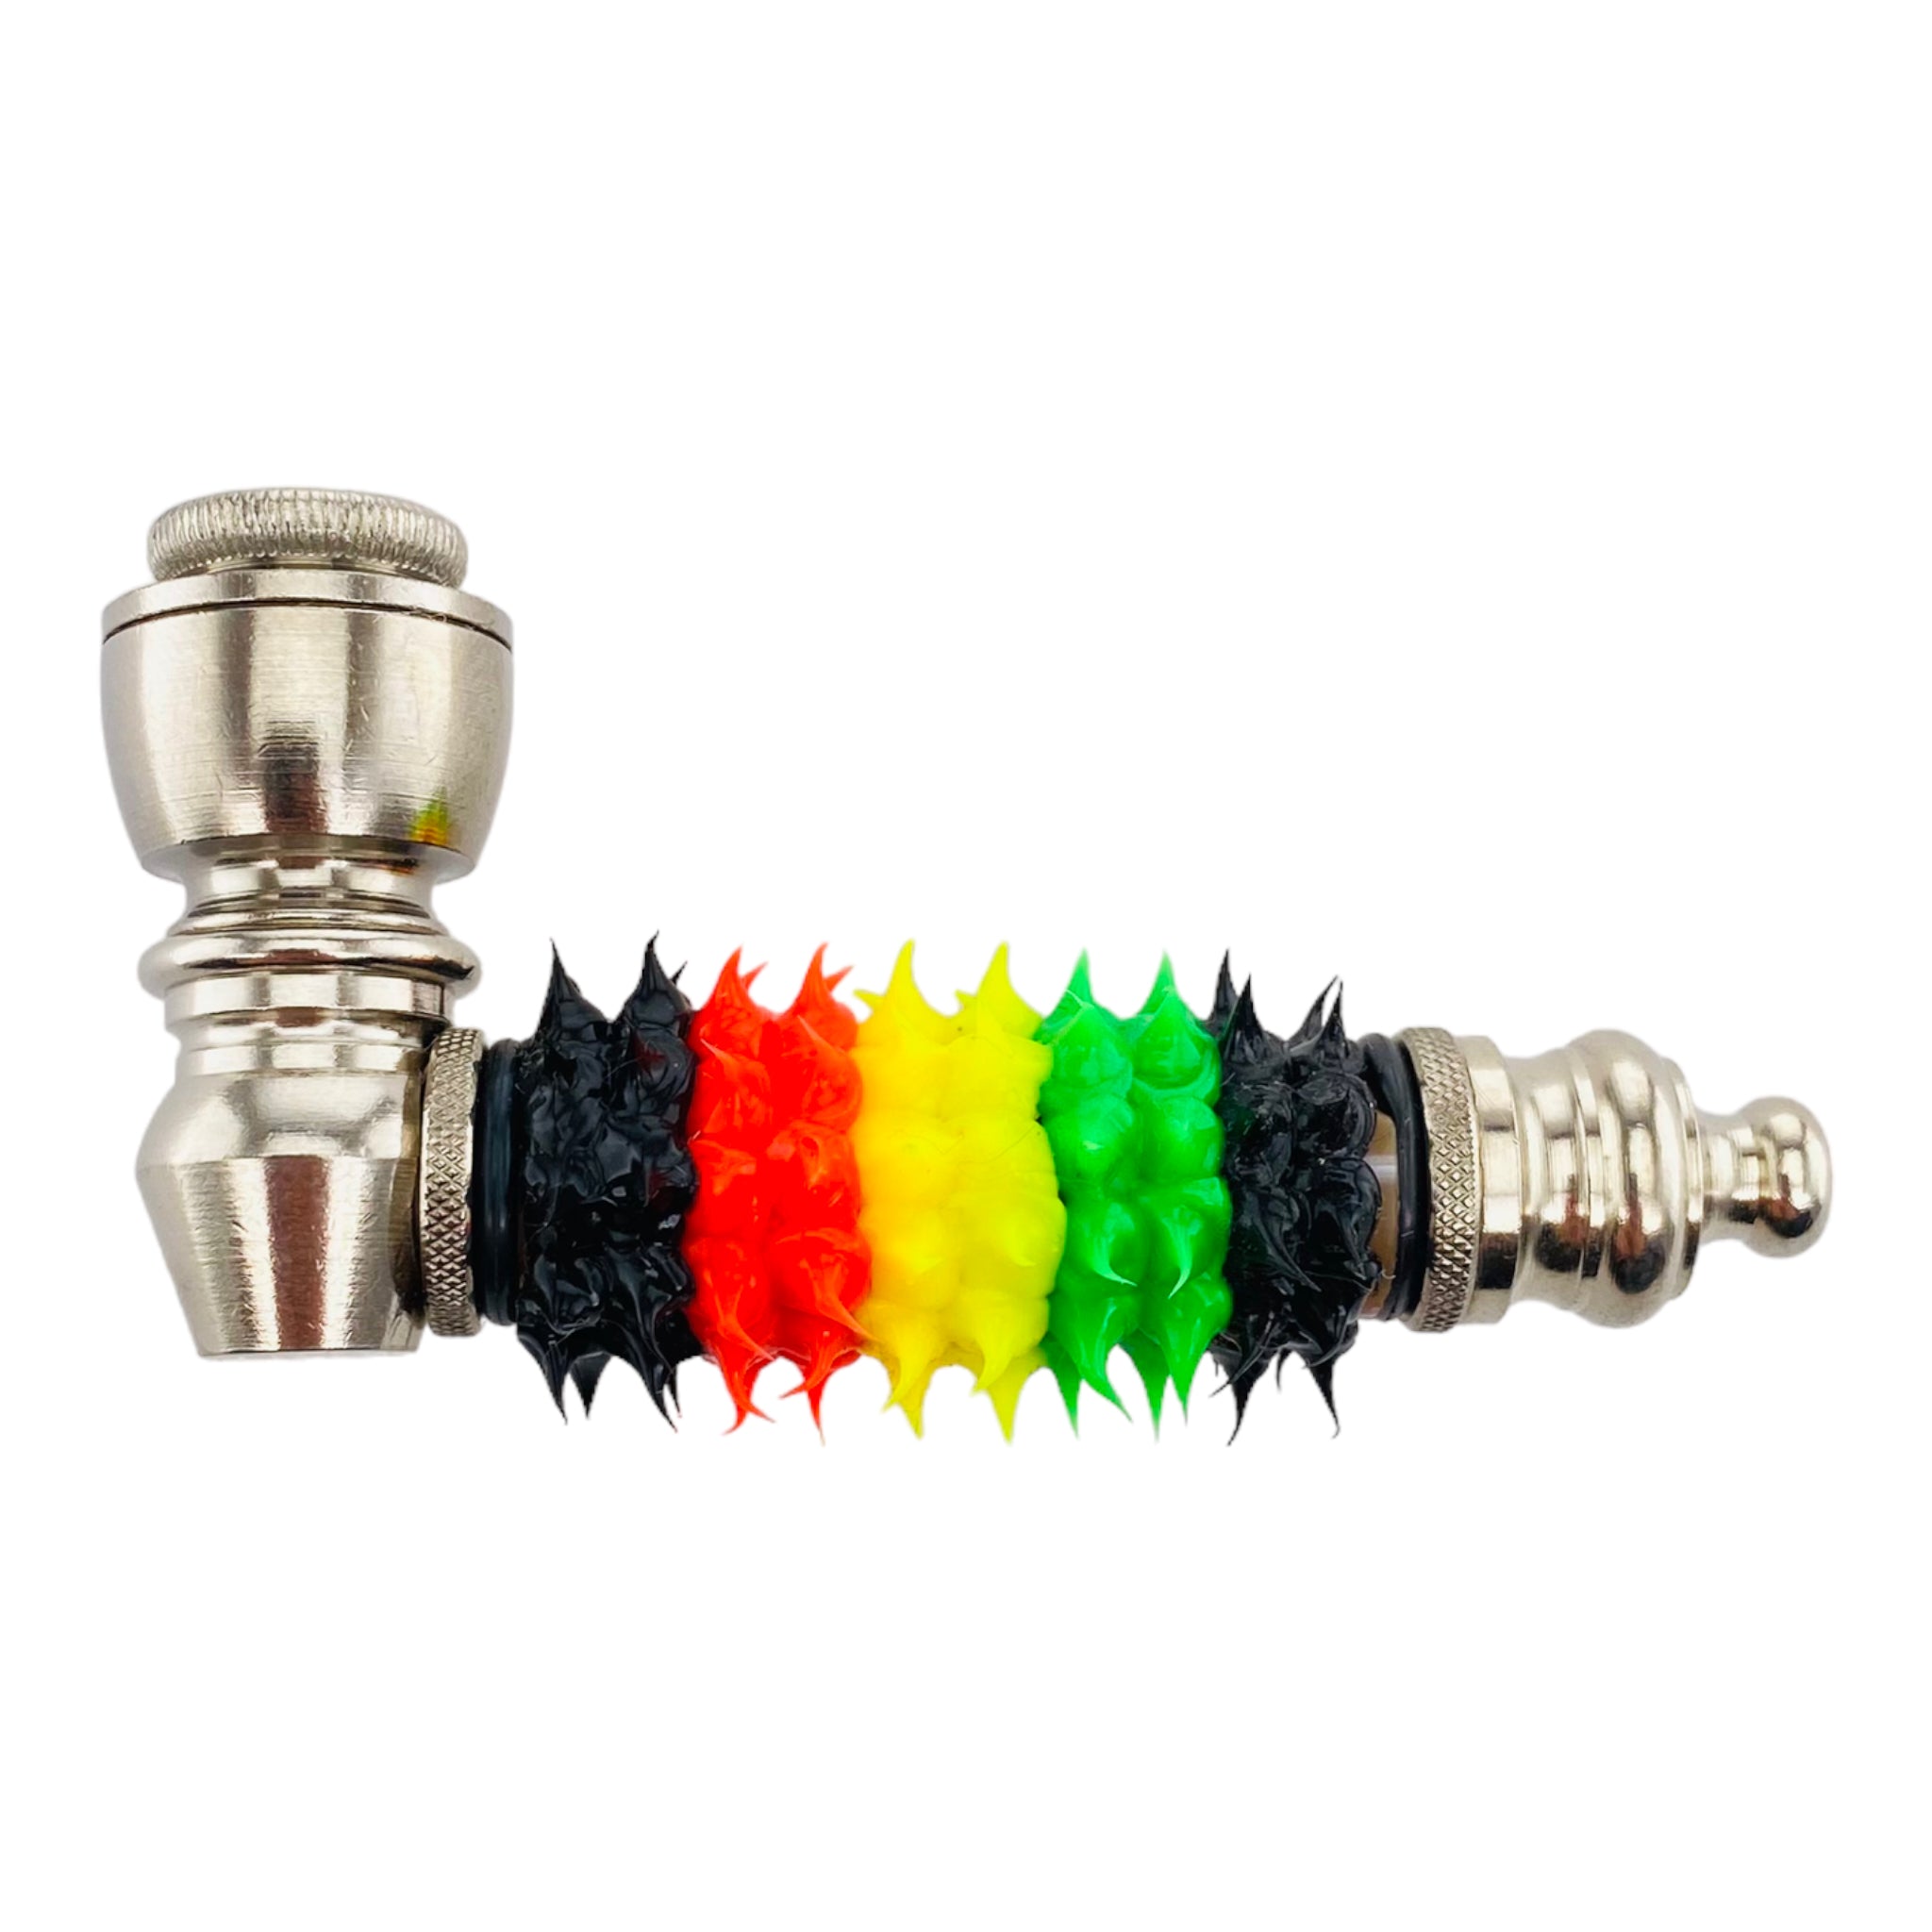 Metal Hand Pipes - Silver Chrome Hand Pipe With Skull With Rasta Silicone Spikes